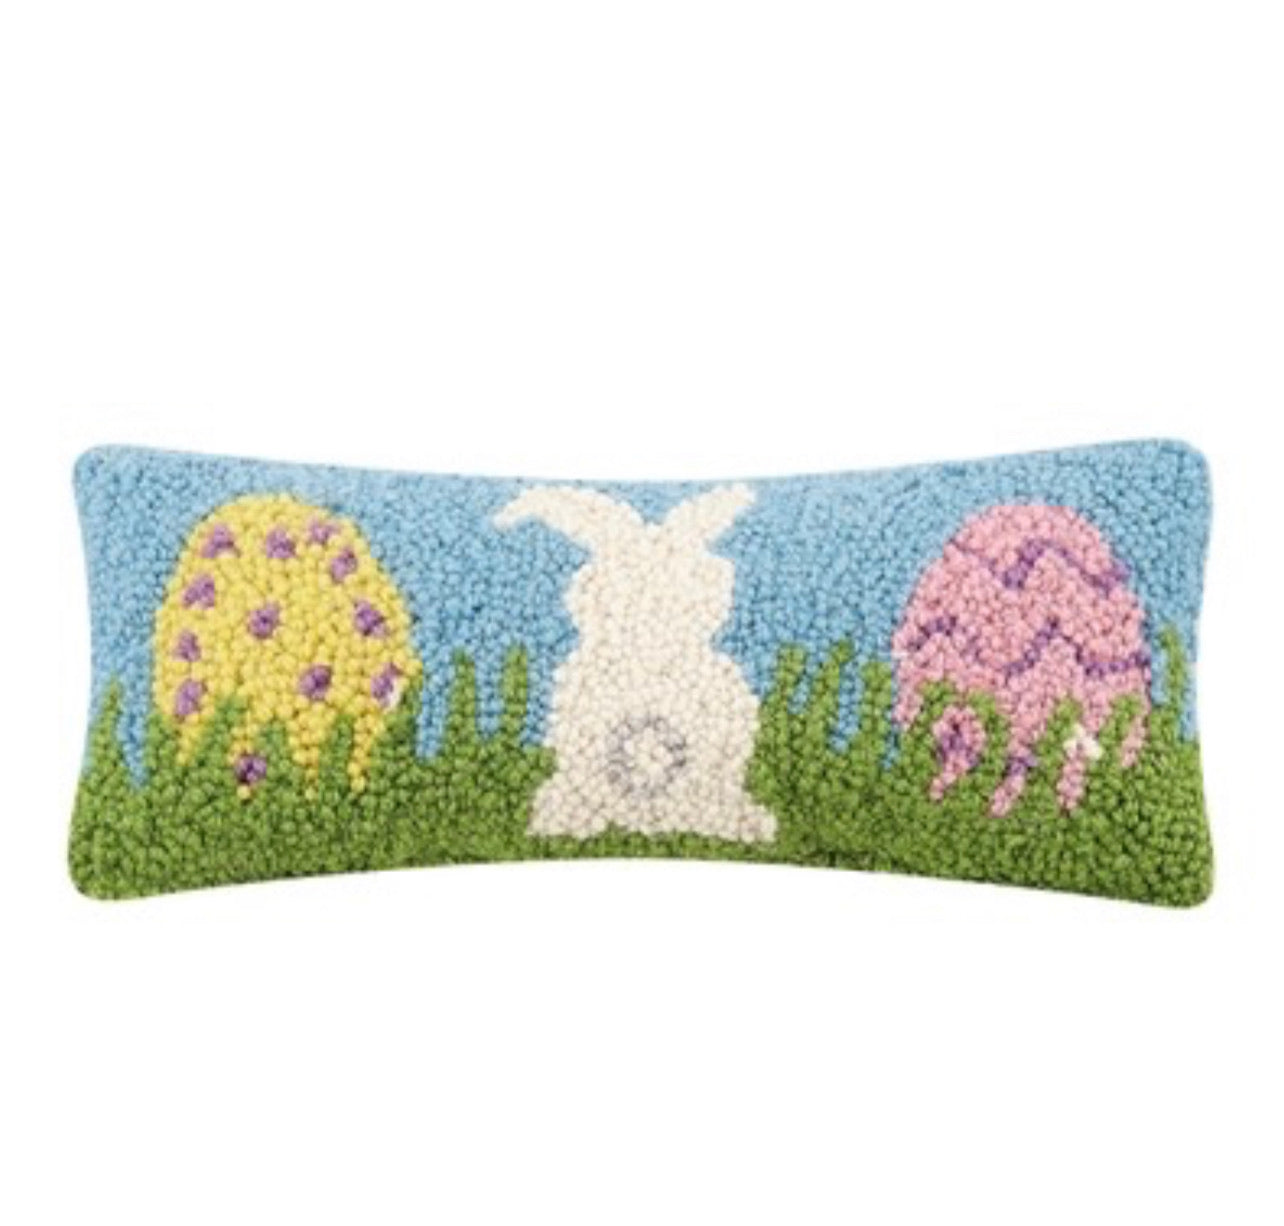 Eggs and Bunny wool hook pillow